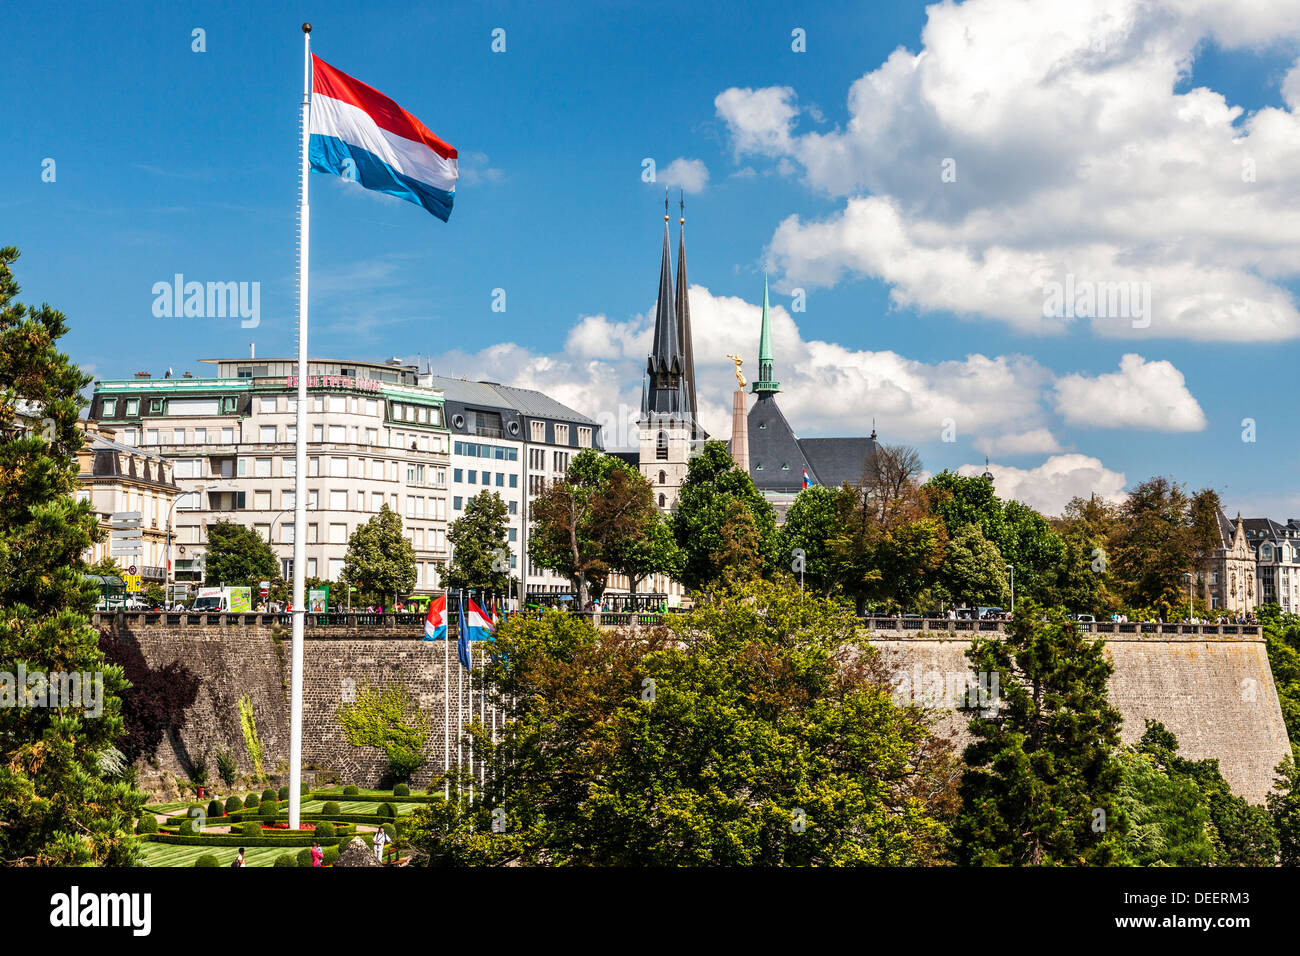 View over the Petrusse Valley Park to the Grand Hotel Cravat and Notre-Dame Cathedral. Luxembourg flag flies against a blue sky. Stock Photo